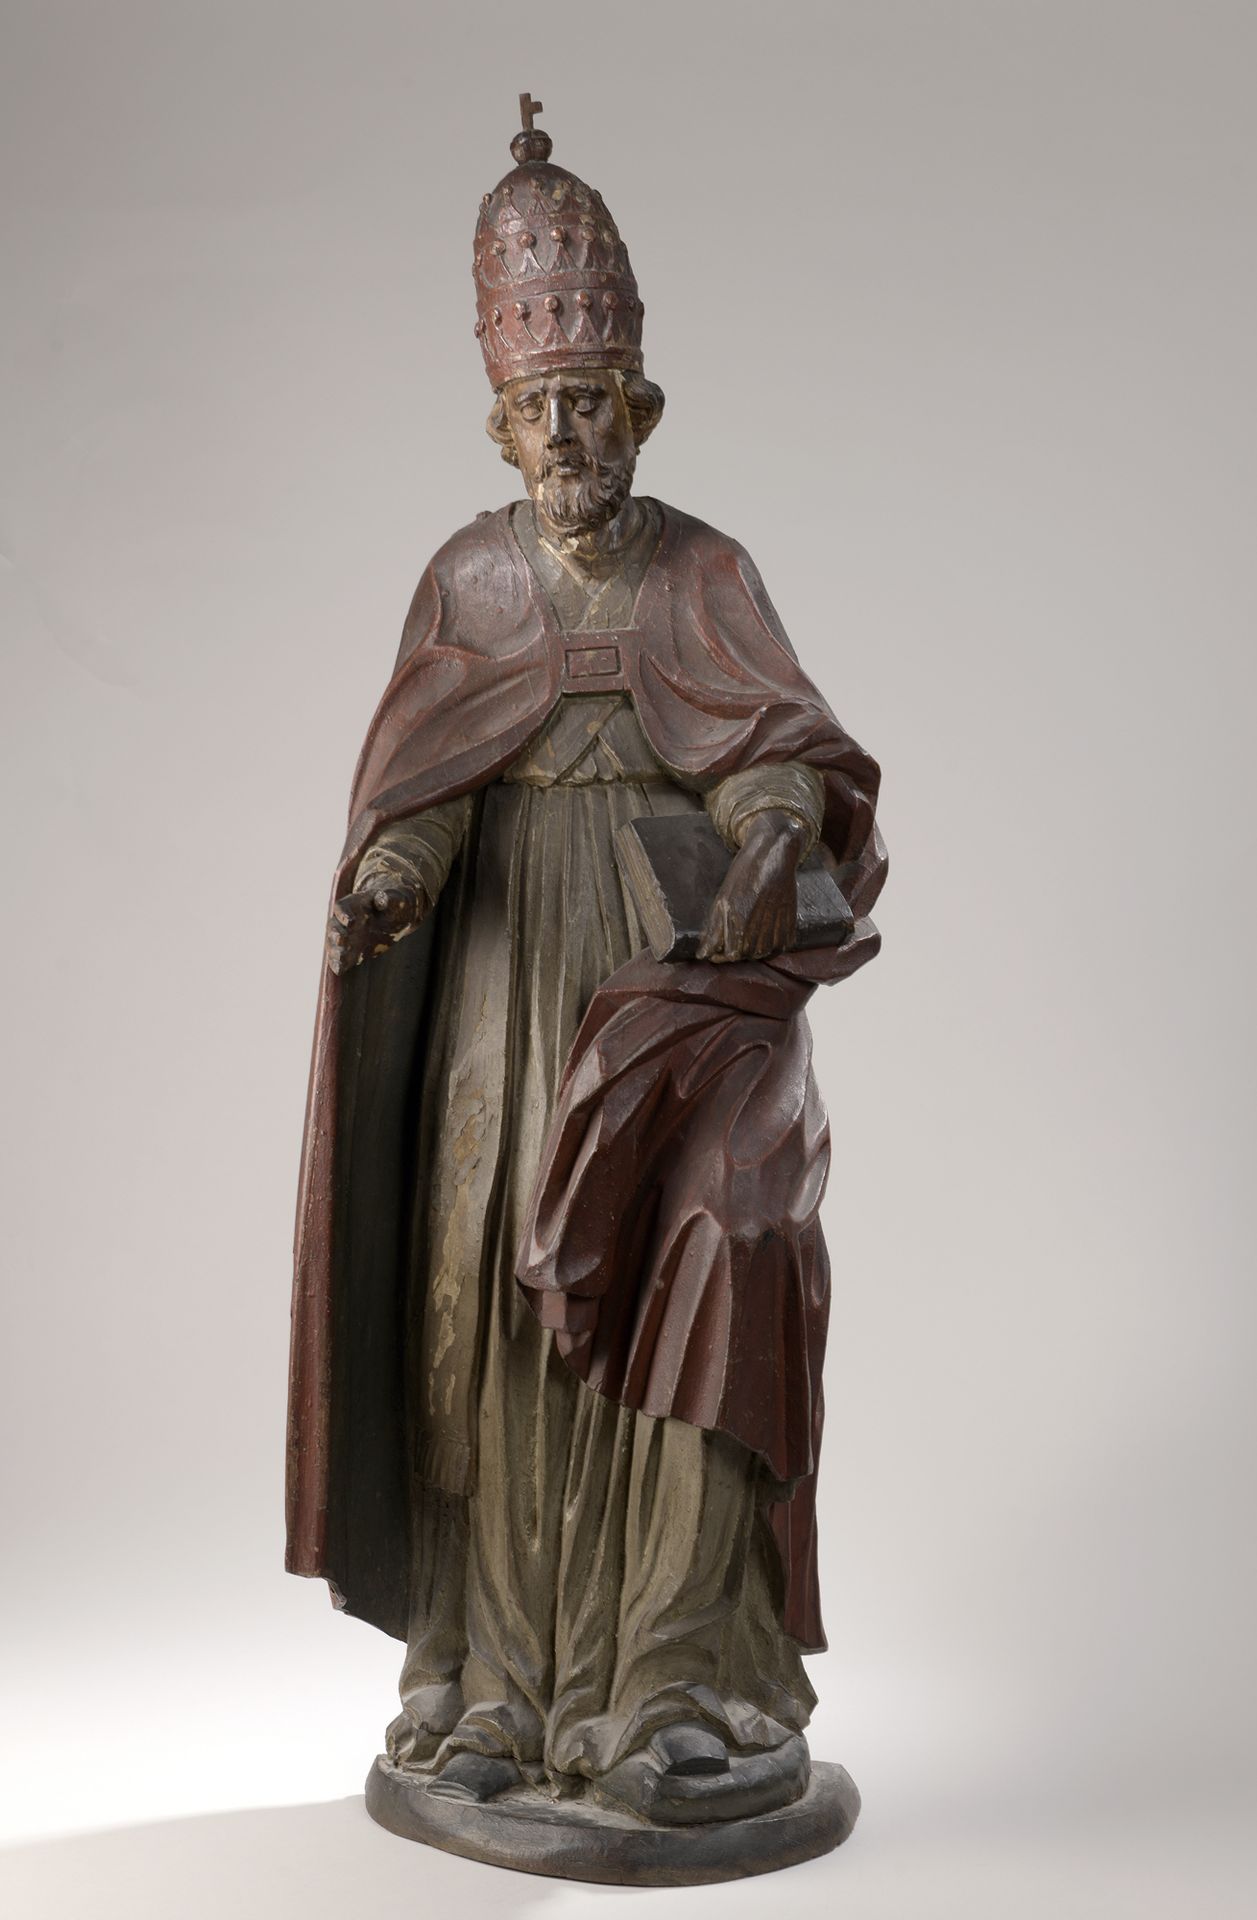 Null FRENCH or FLEMISH school, 18th century

Saint Peter wearing the papal tiara&hellip;